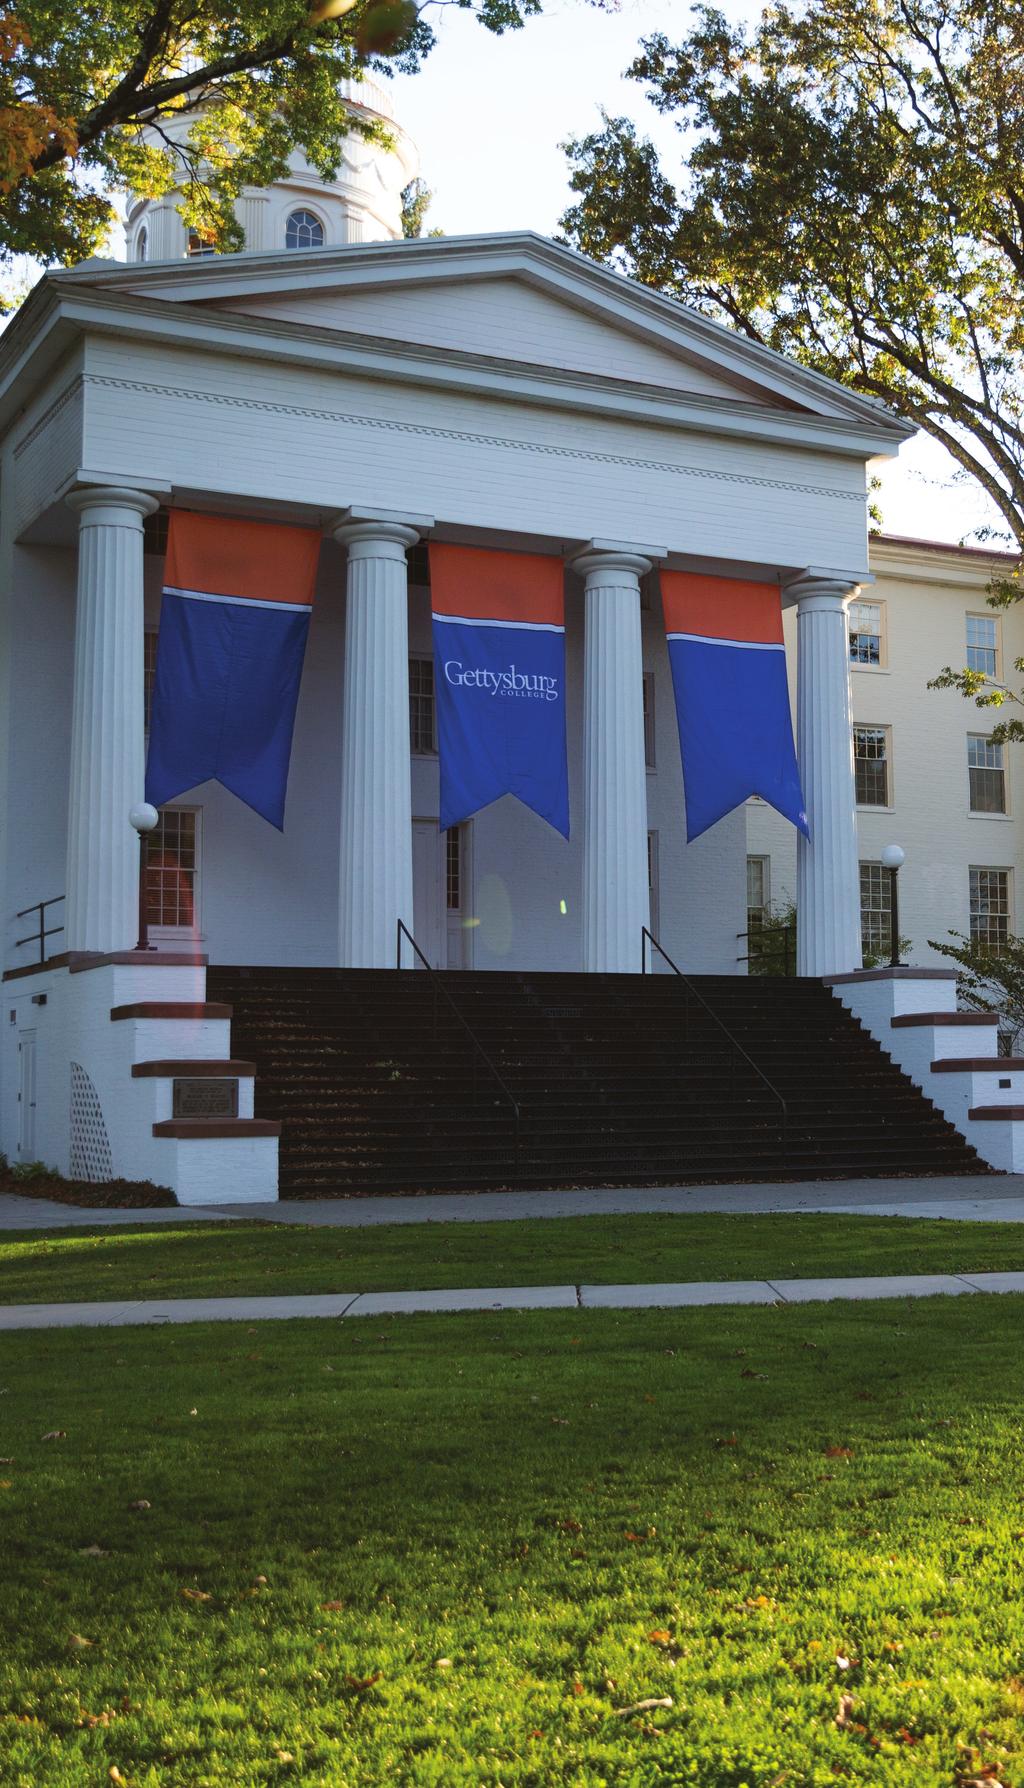 Dear Fellow Gettysburgian, I am writing to invite you to return home to Gettysburg College for our Alumni College & Reunion Weekend on May 31 June 3, 2018.